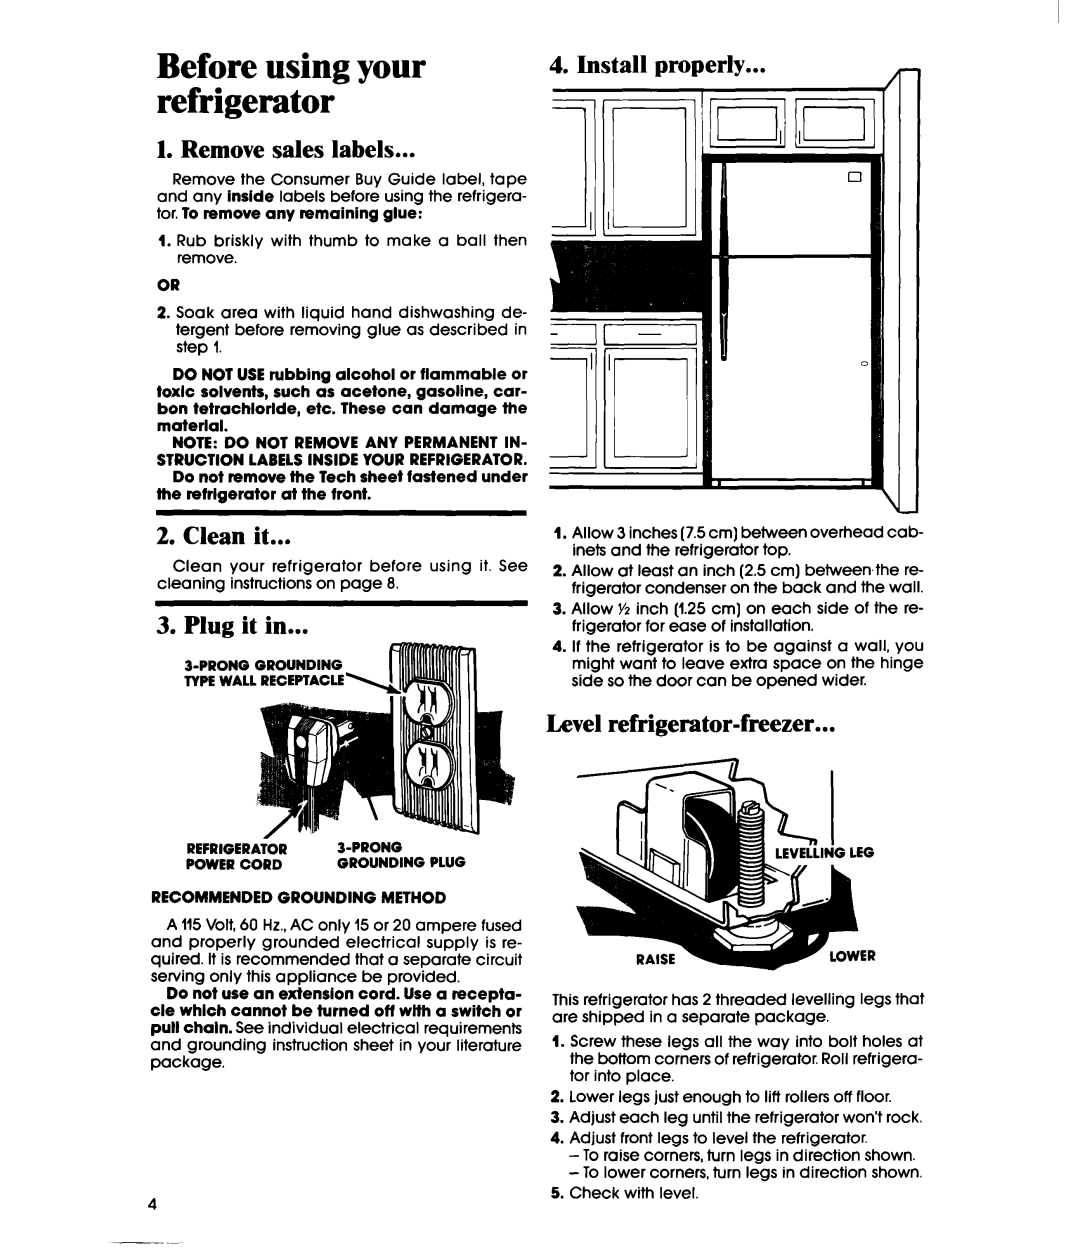 Whirlpool ETl4JM manual Before using your refrigerator, Remove sales labels, Install properly, Clean it, Plug- it in, 1II-l 